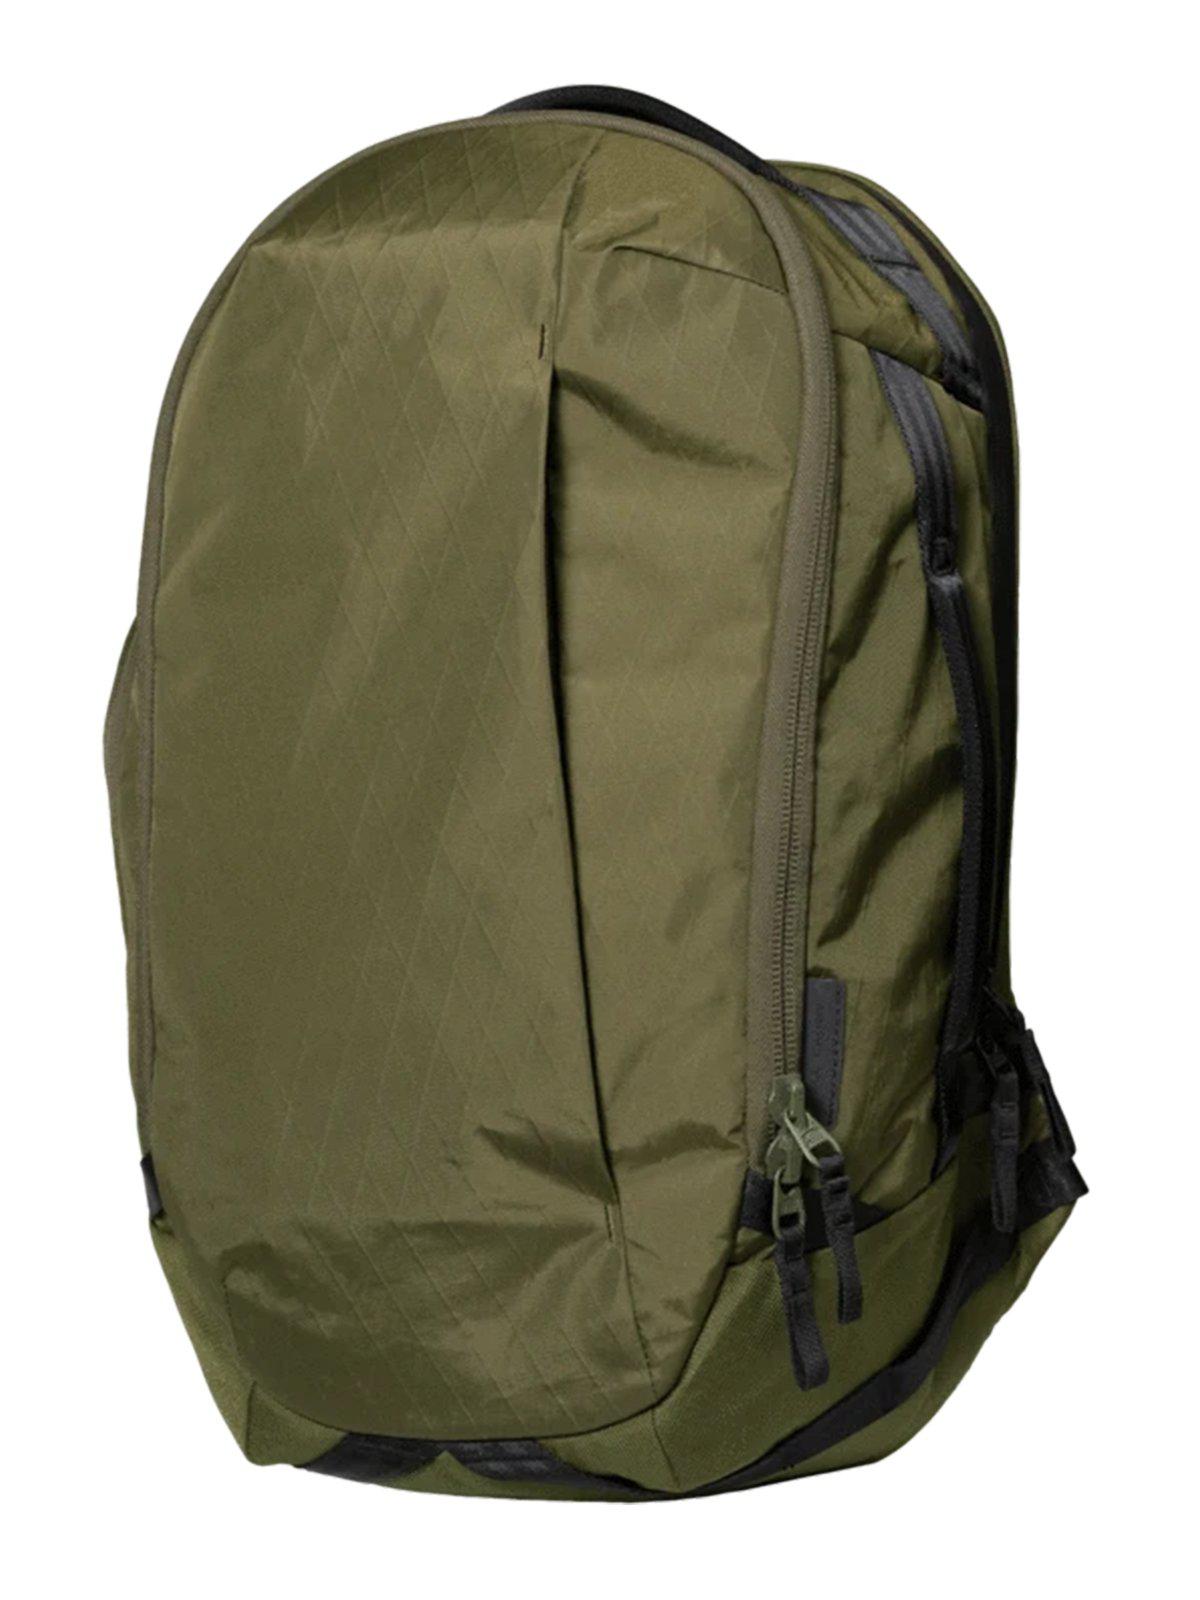 Able Carry Max Backpack Earth Green